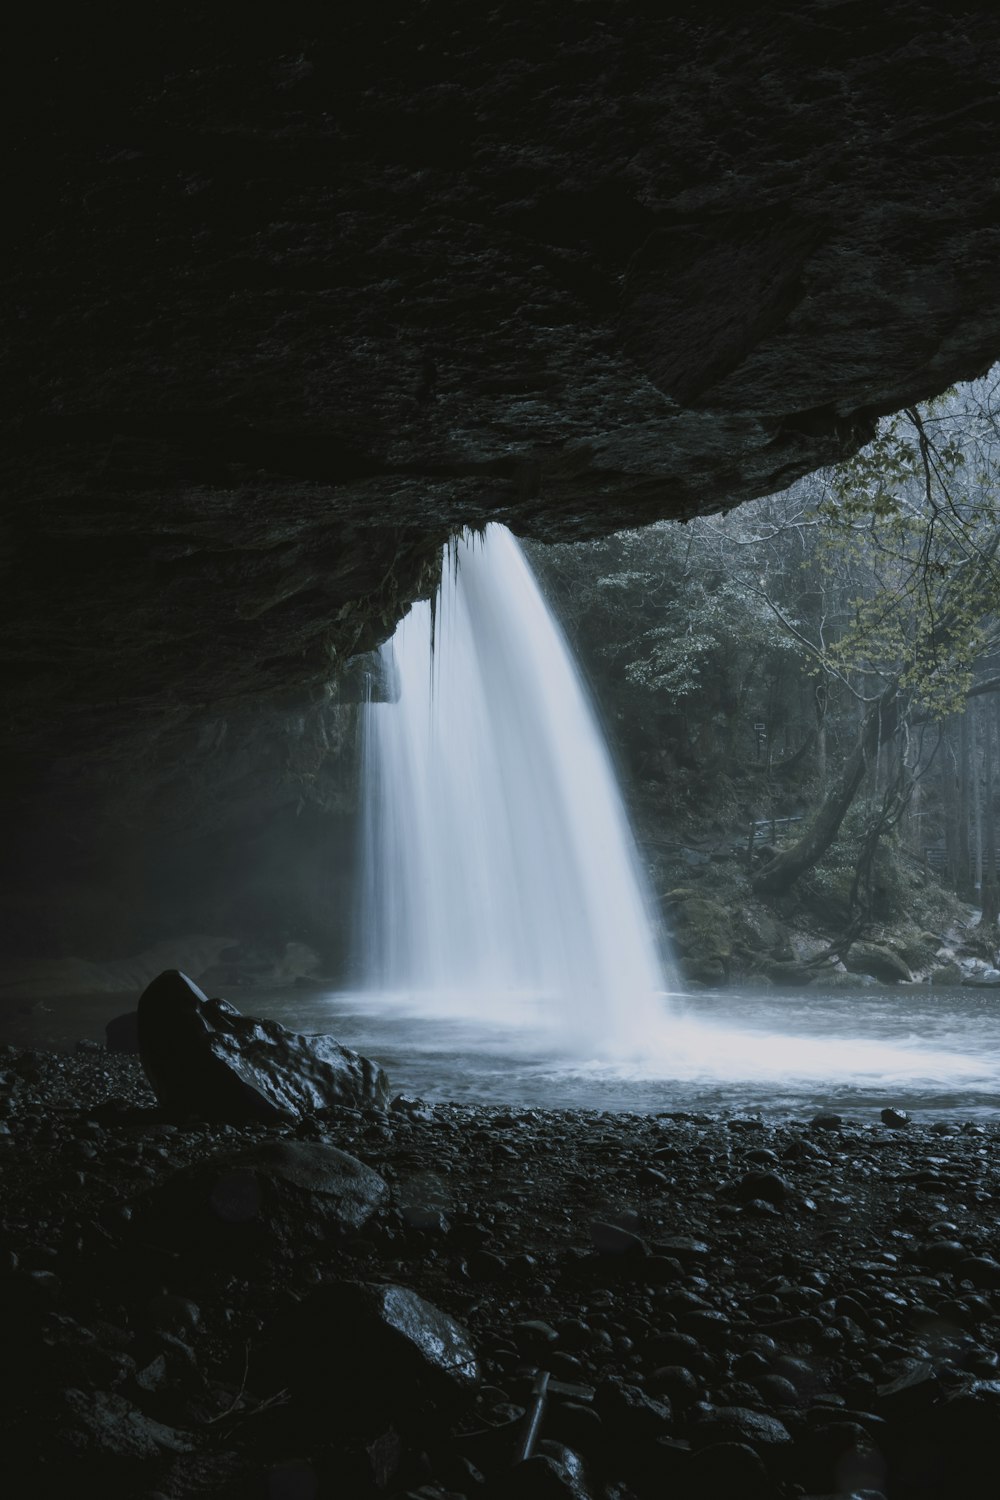 water falls in cave during daytime